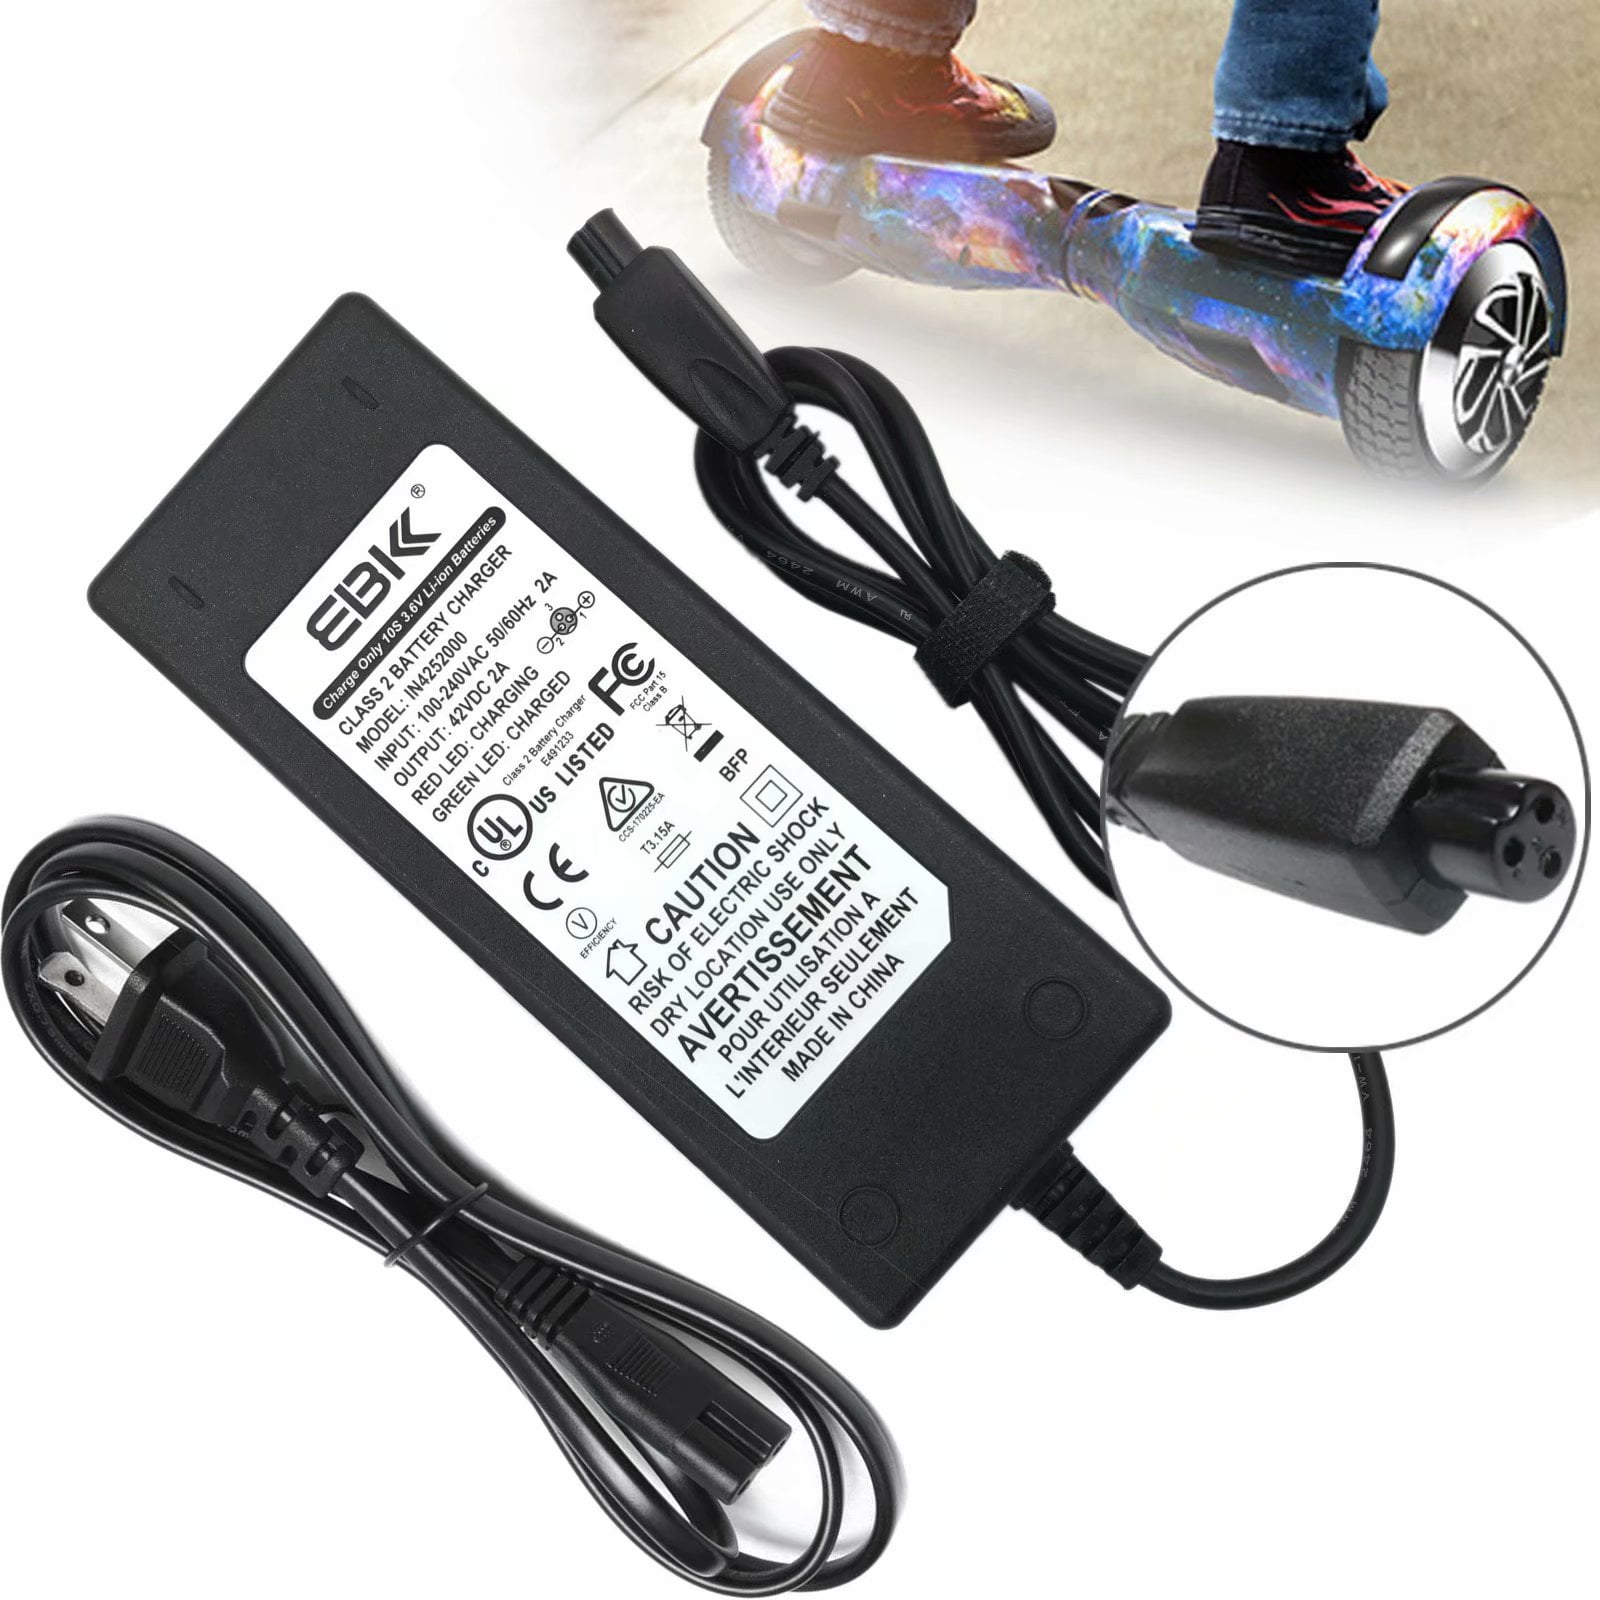 42V 2A Battery Charger Adapter Power Supply For Electric Balance Scooter Surpris 